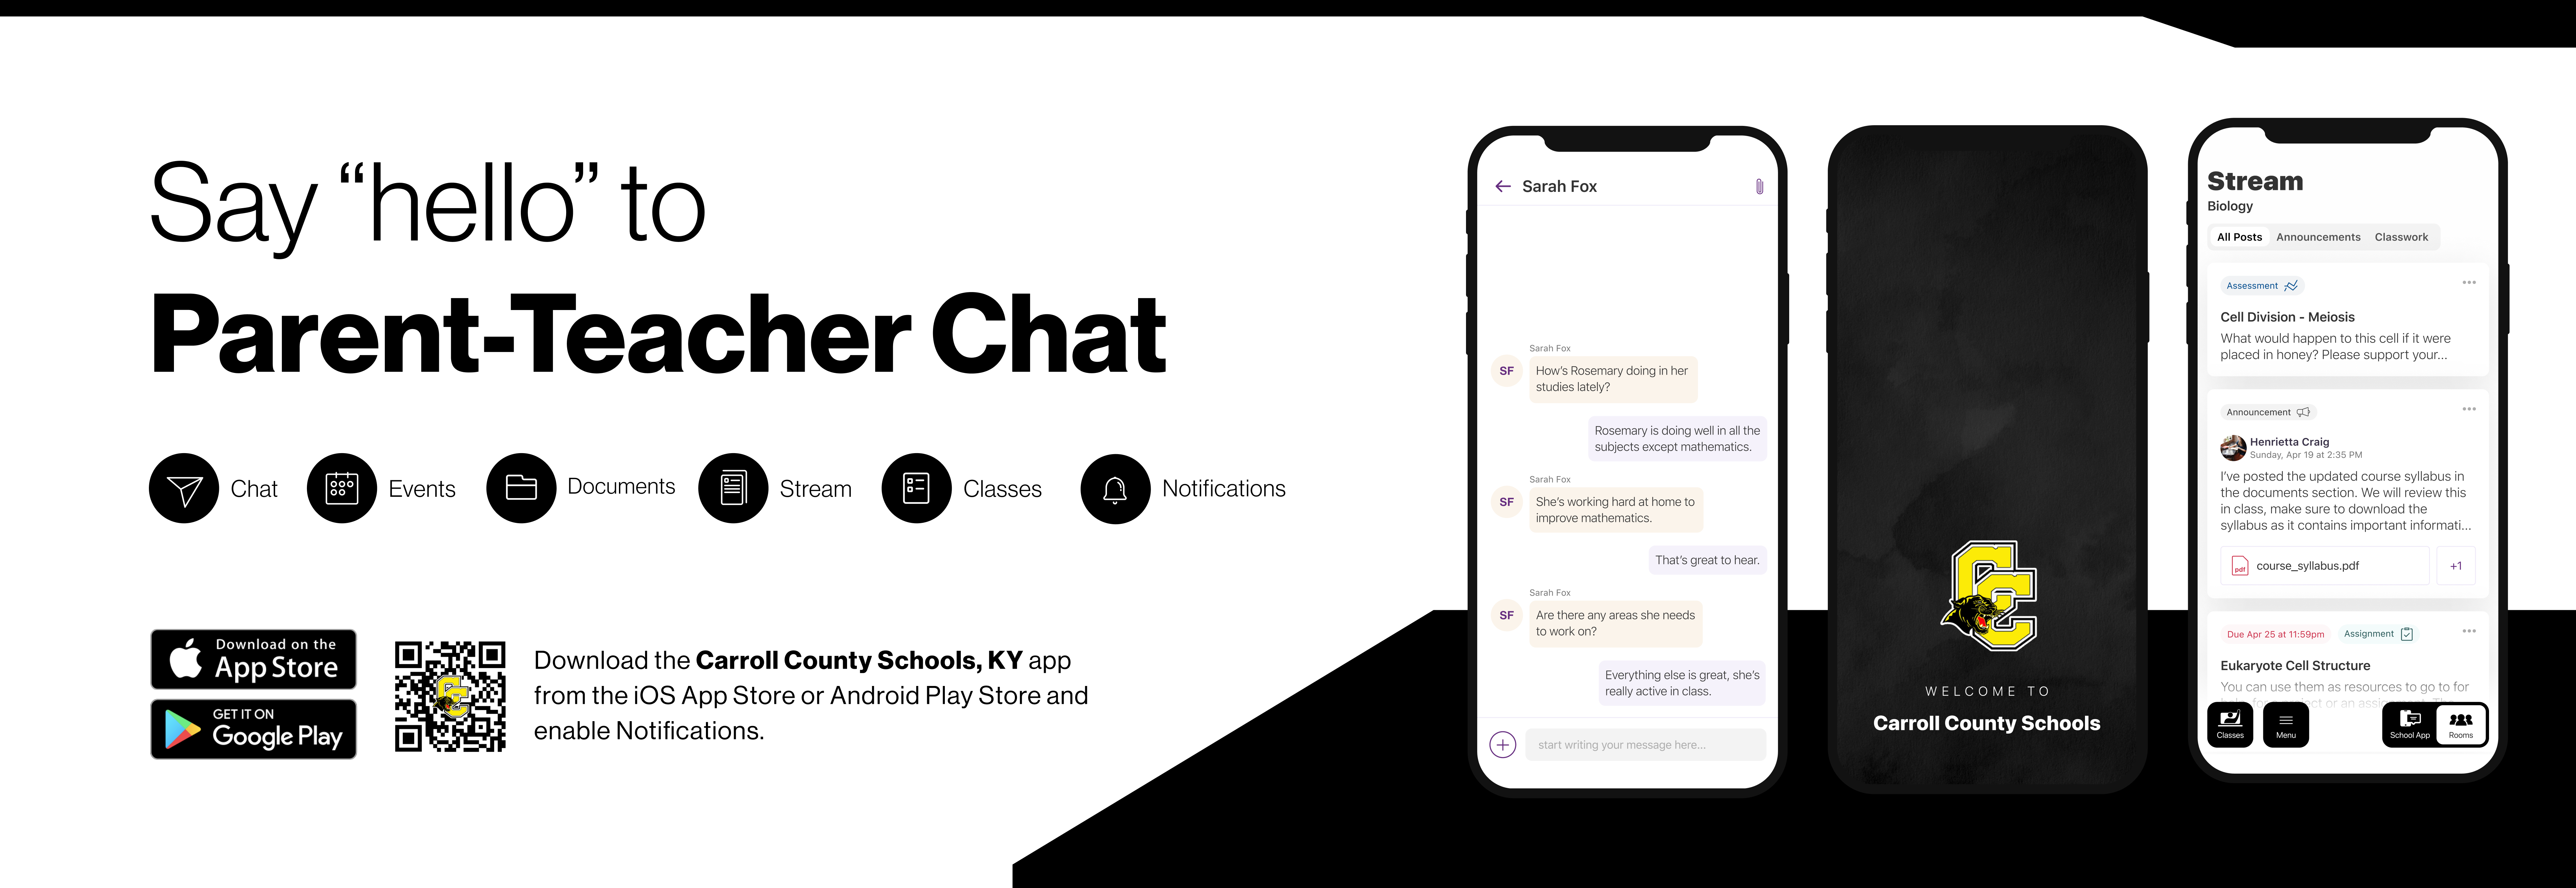 Say hello to Parent-Teacher chat in the new Rooms app. Download the Carroll County Schools app in the Google Play or Apple App store